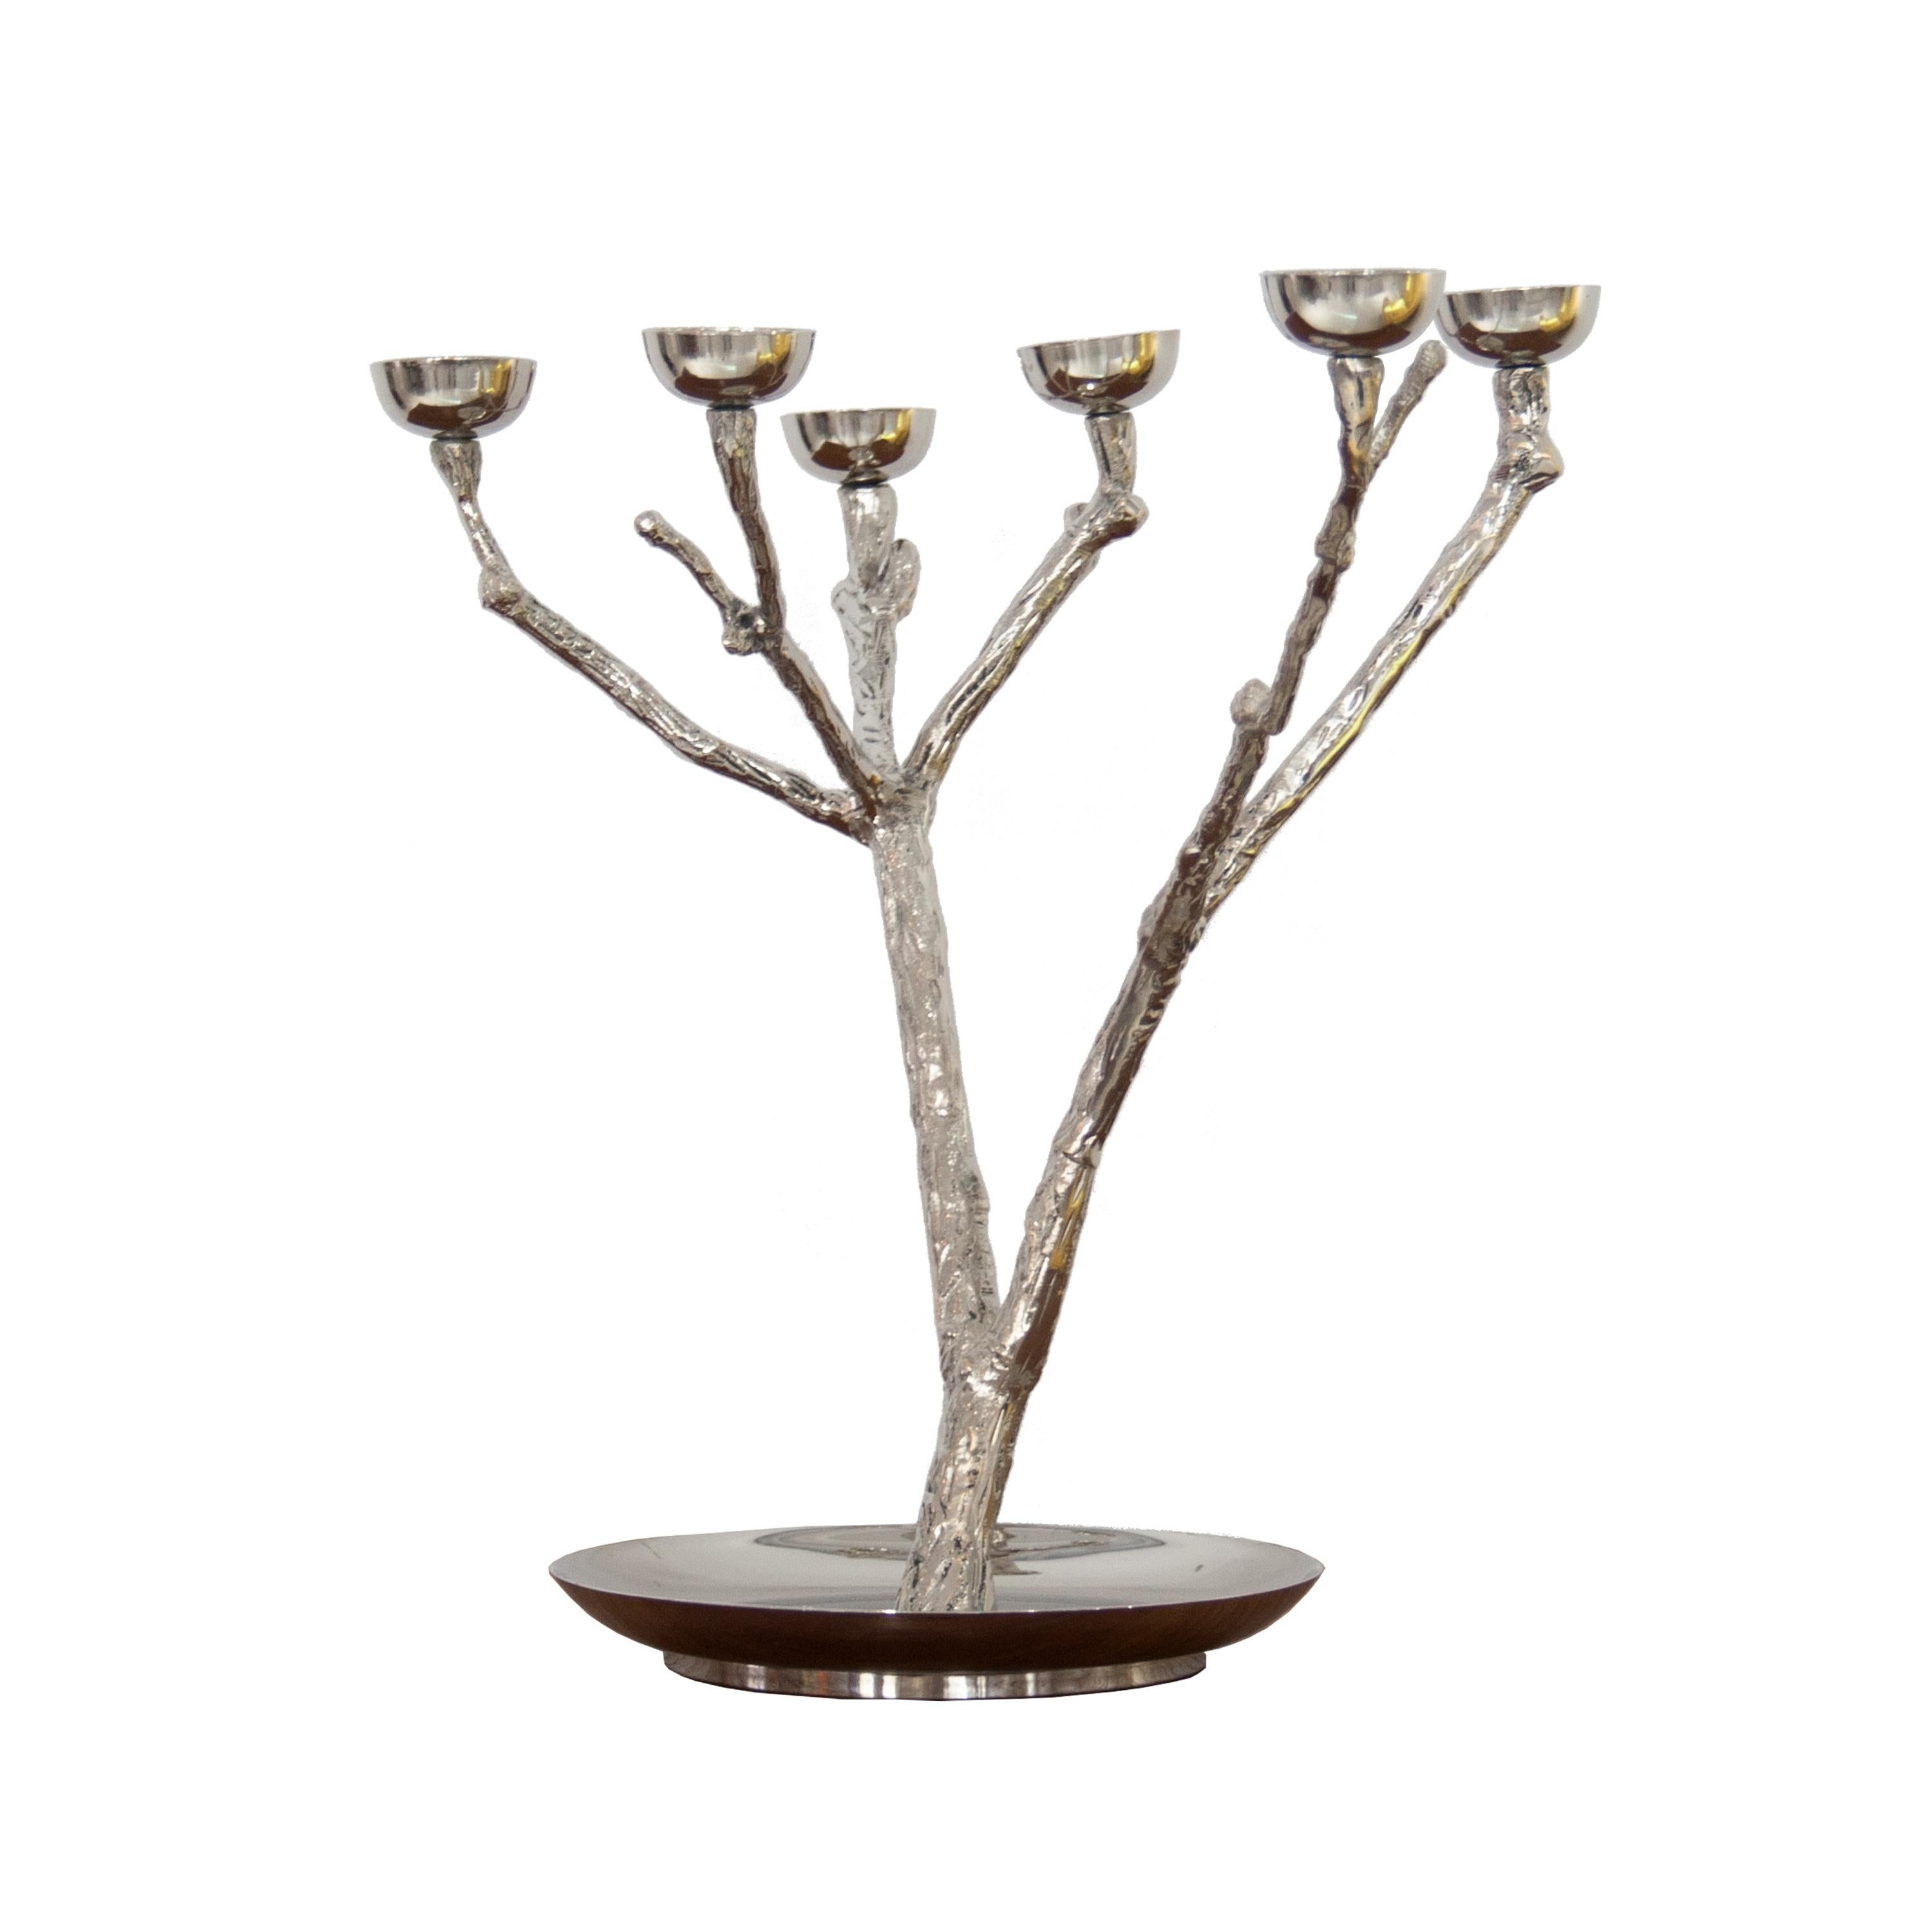 Contemporary candle holder compose of a plate with two tree branches. Made of nickel plated brass.